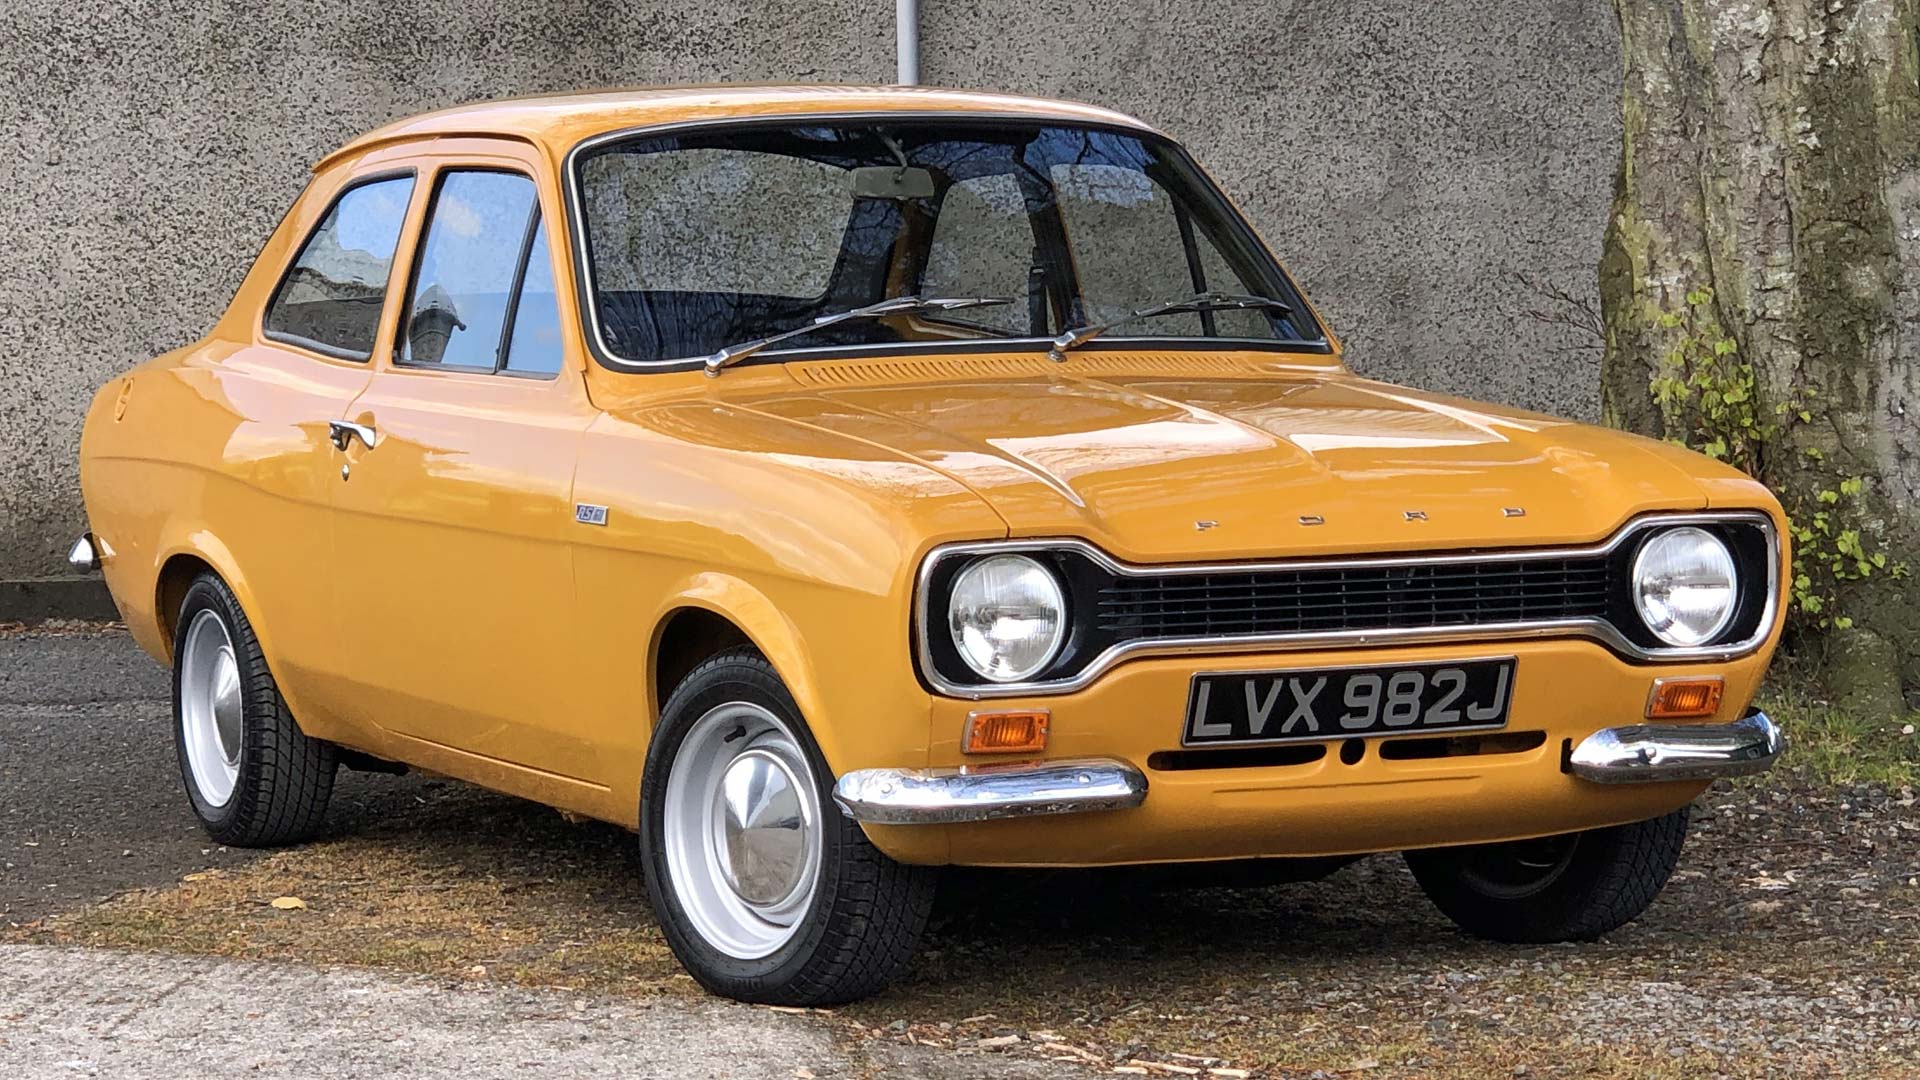 Praise the Ford: stunning Mk1 Escort RS1600 up for auction